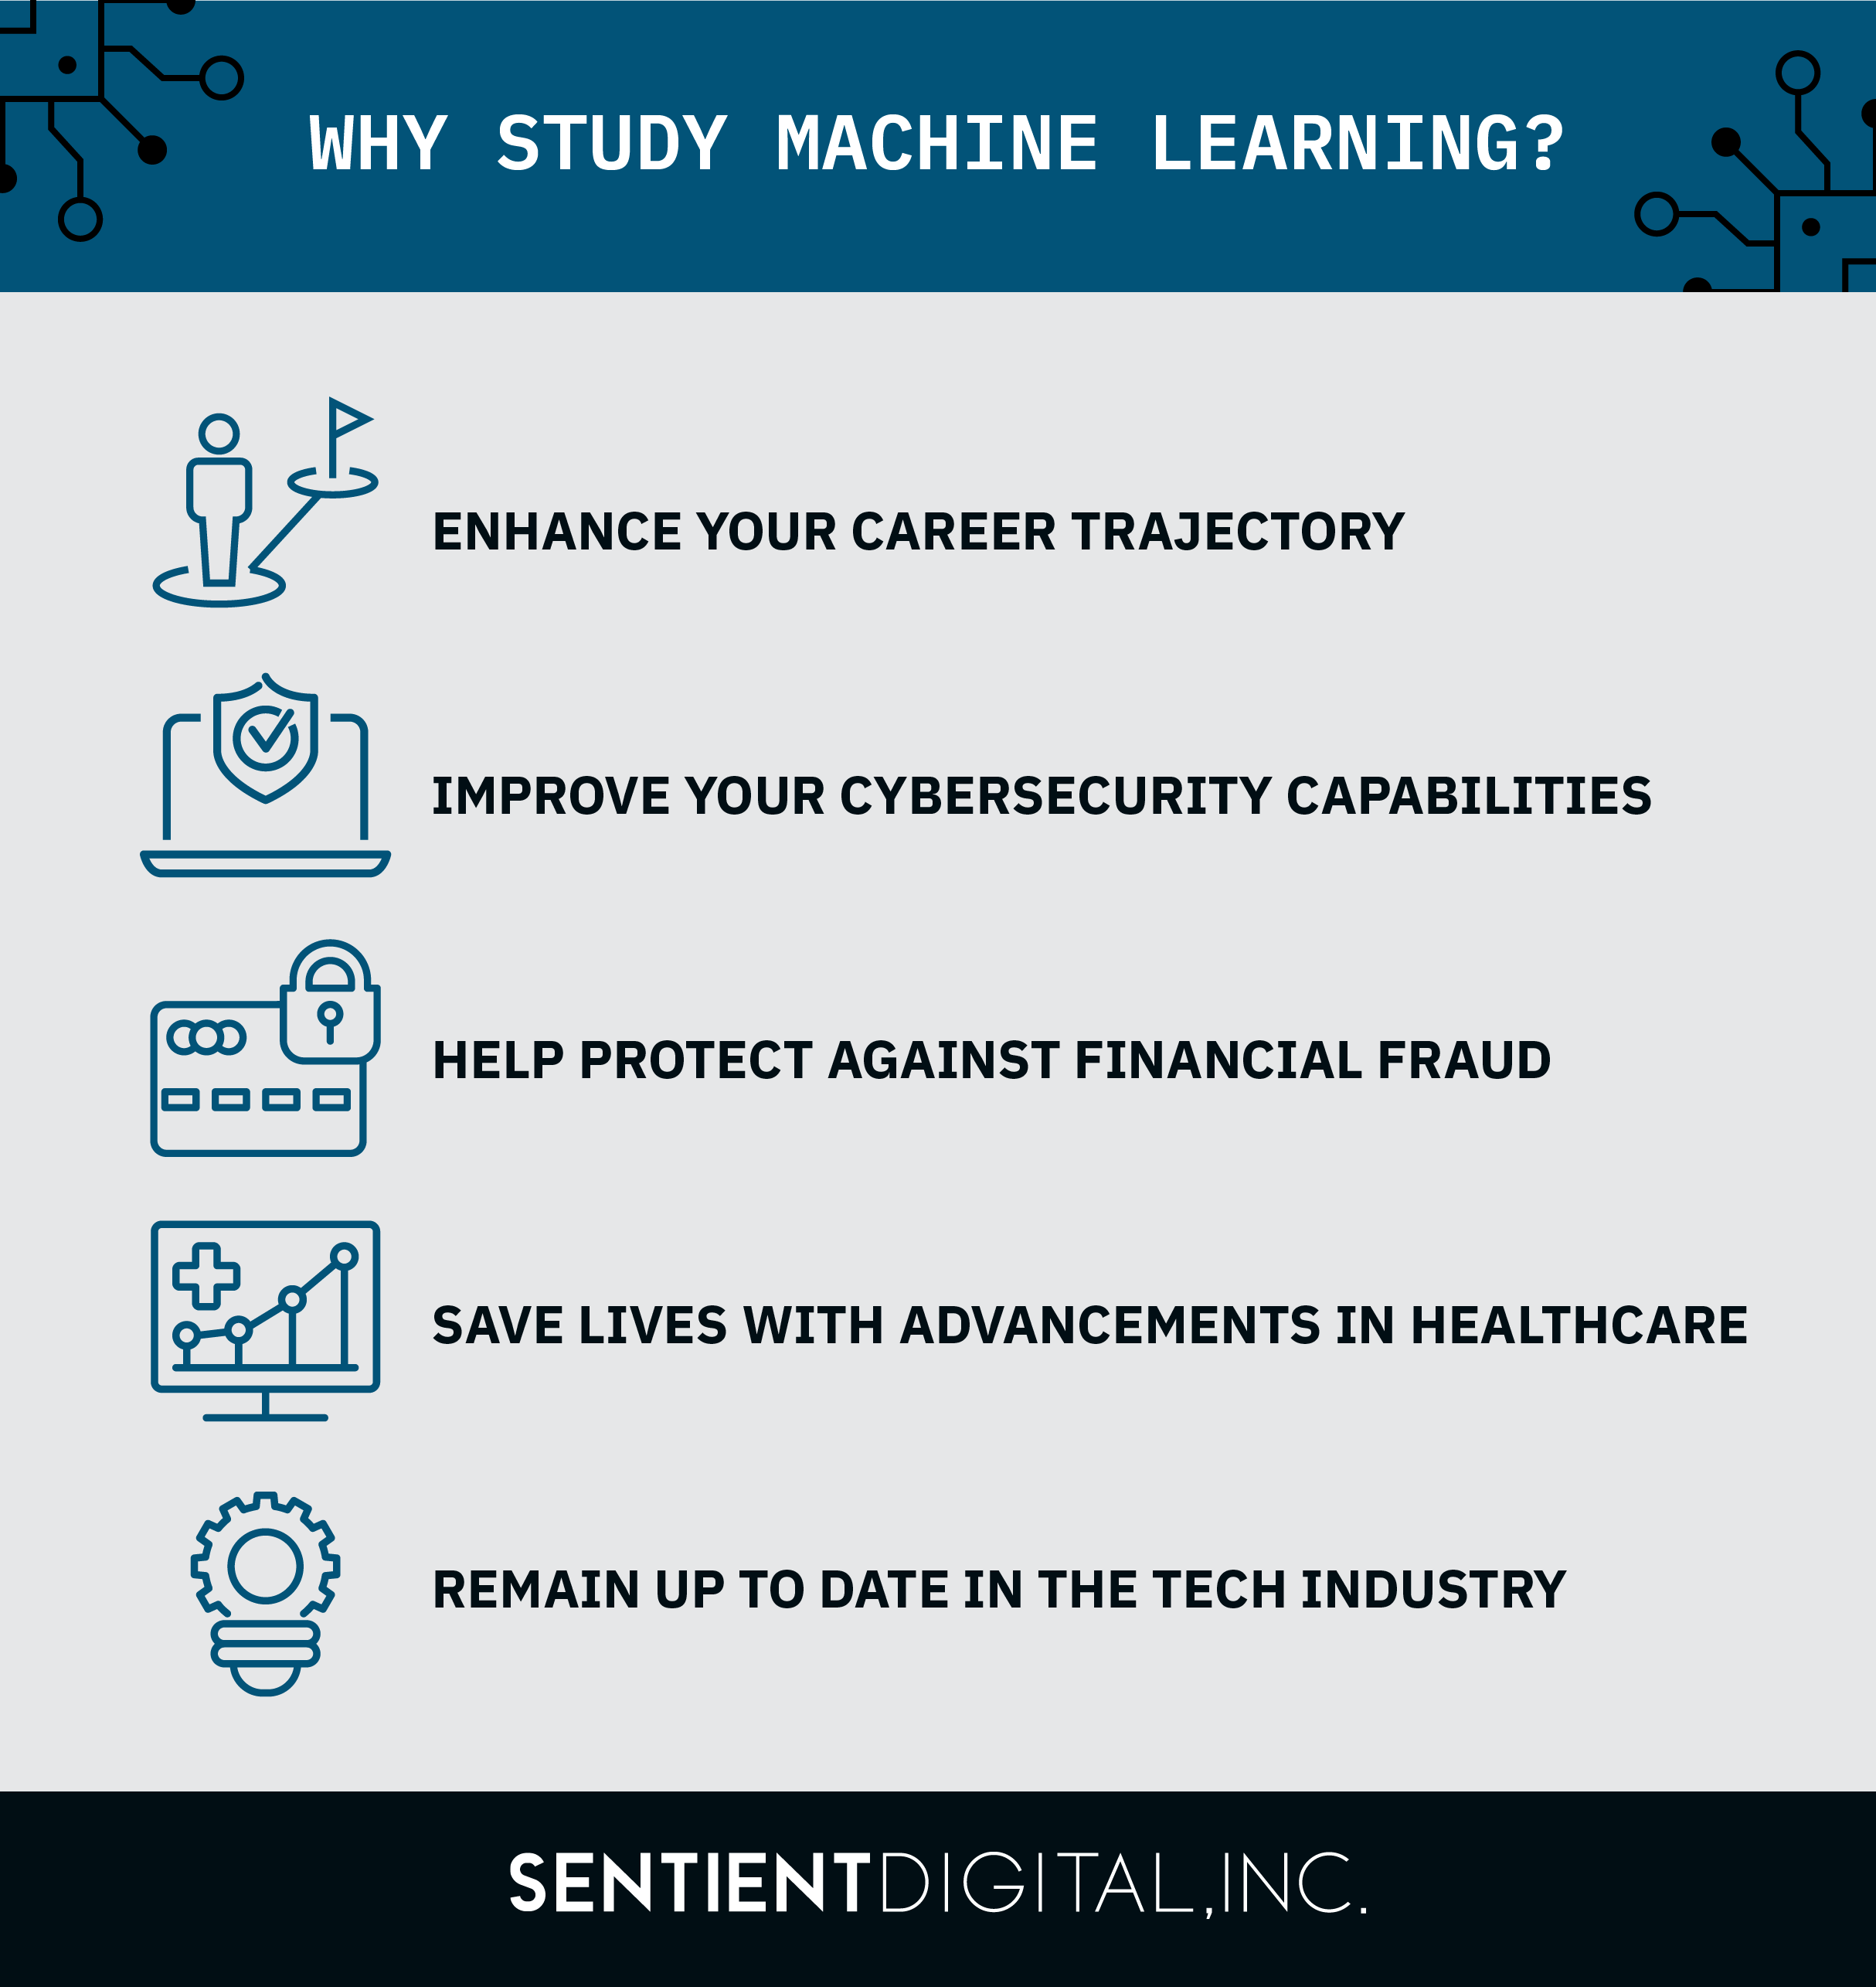 Check out our infographic with 5 advantages of learning machine learning and keep reading for more details about each.